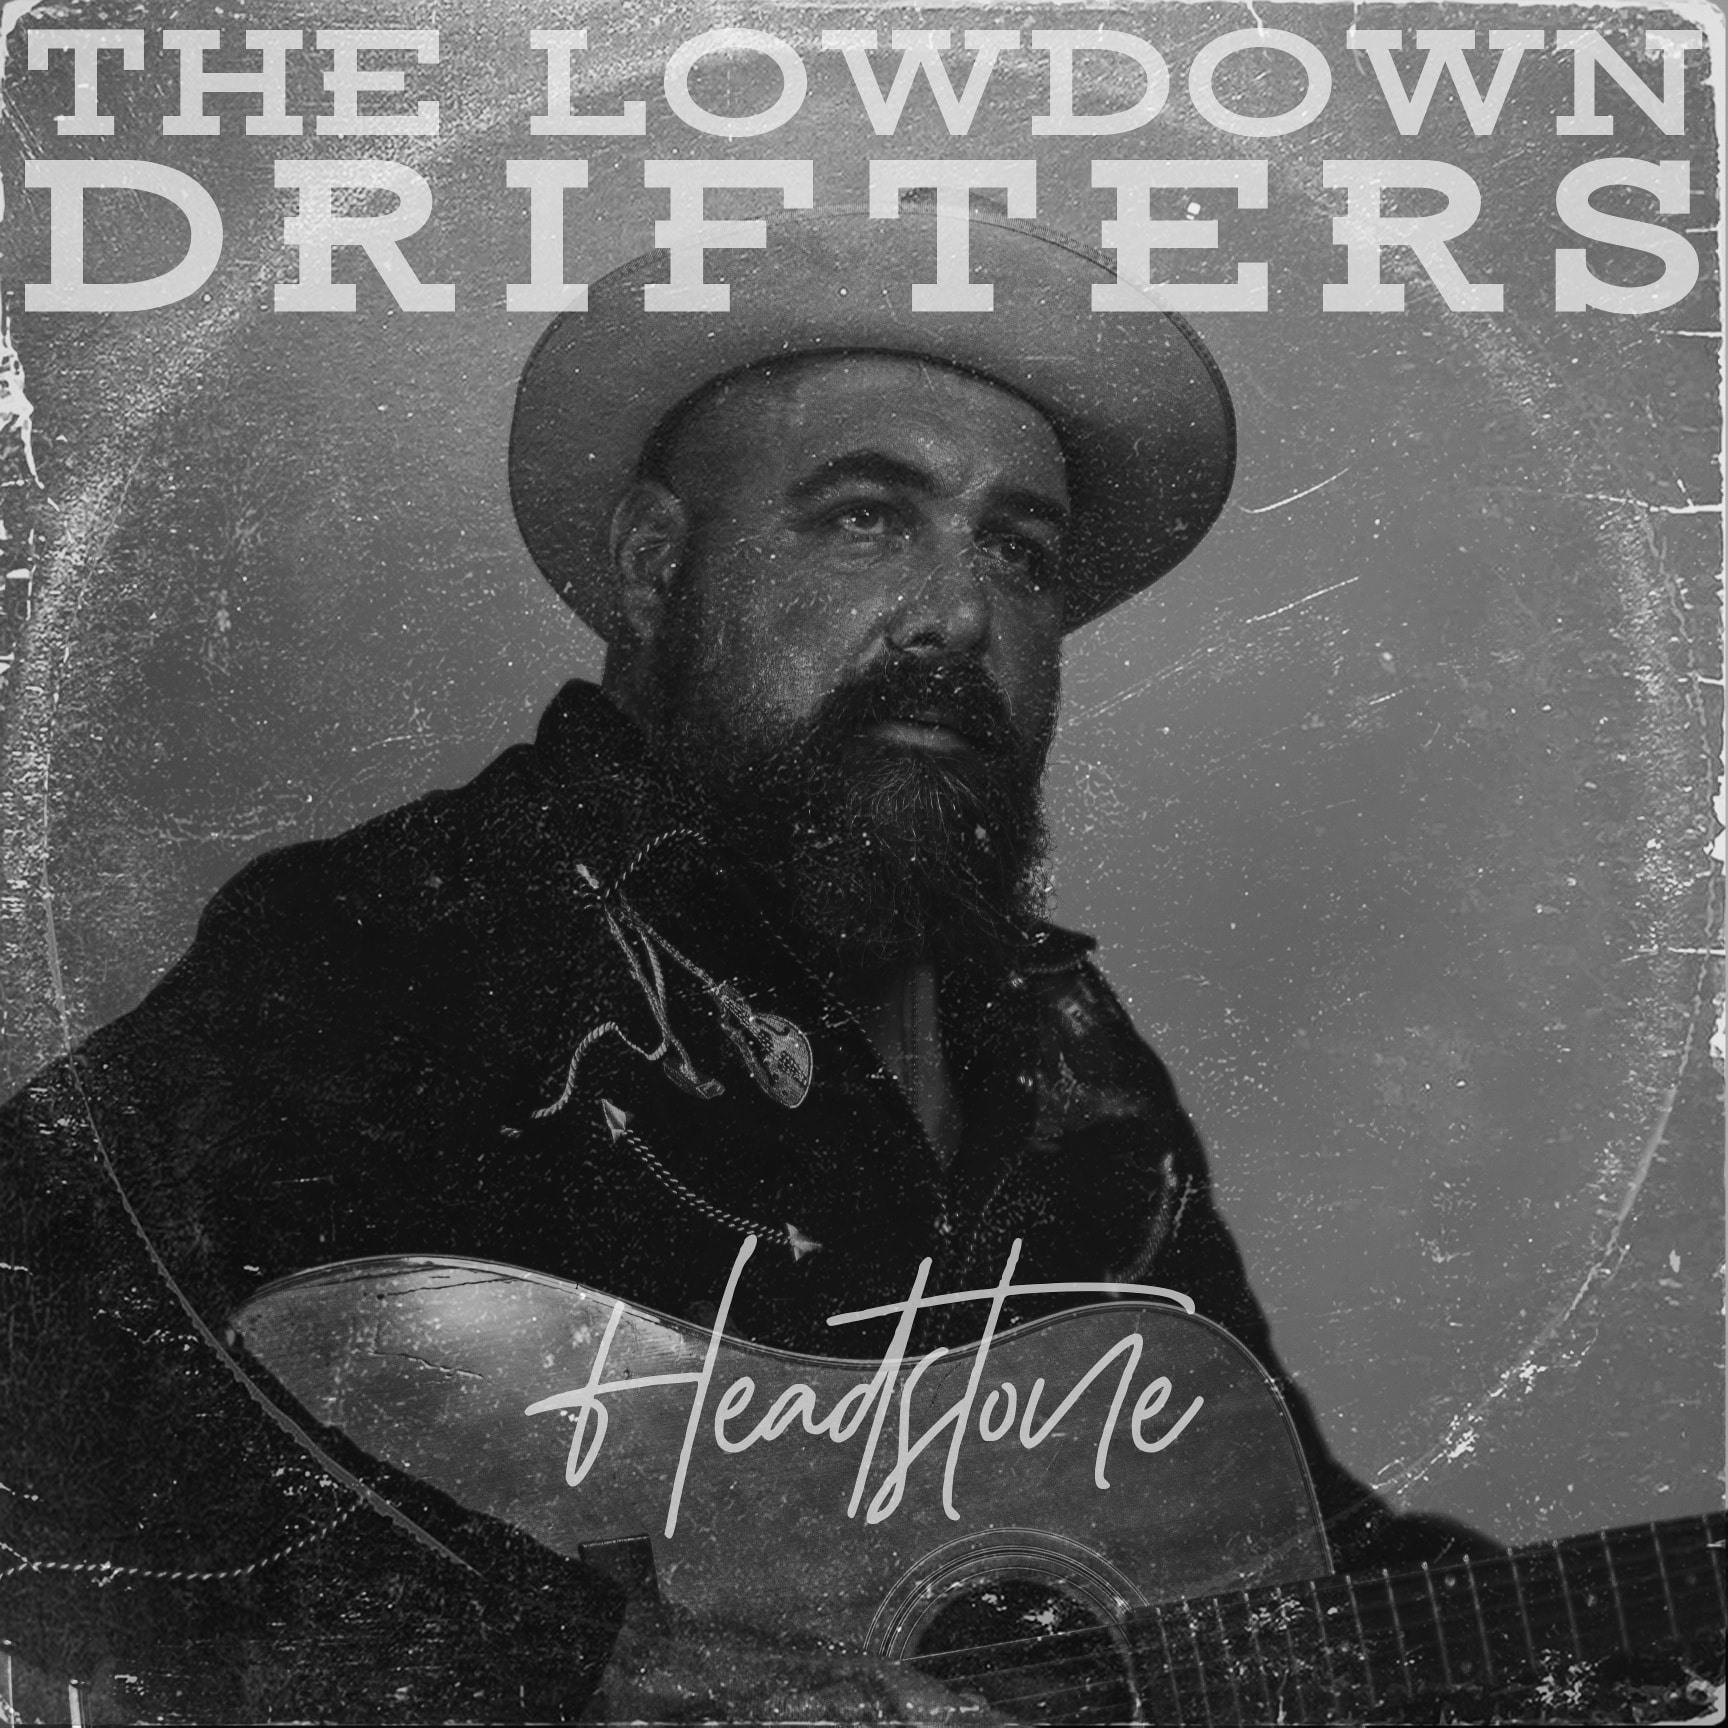 The Lowdown Drifters at Moonshine Drinkery